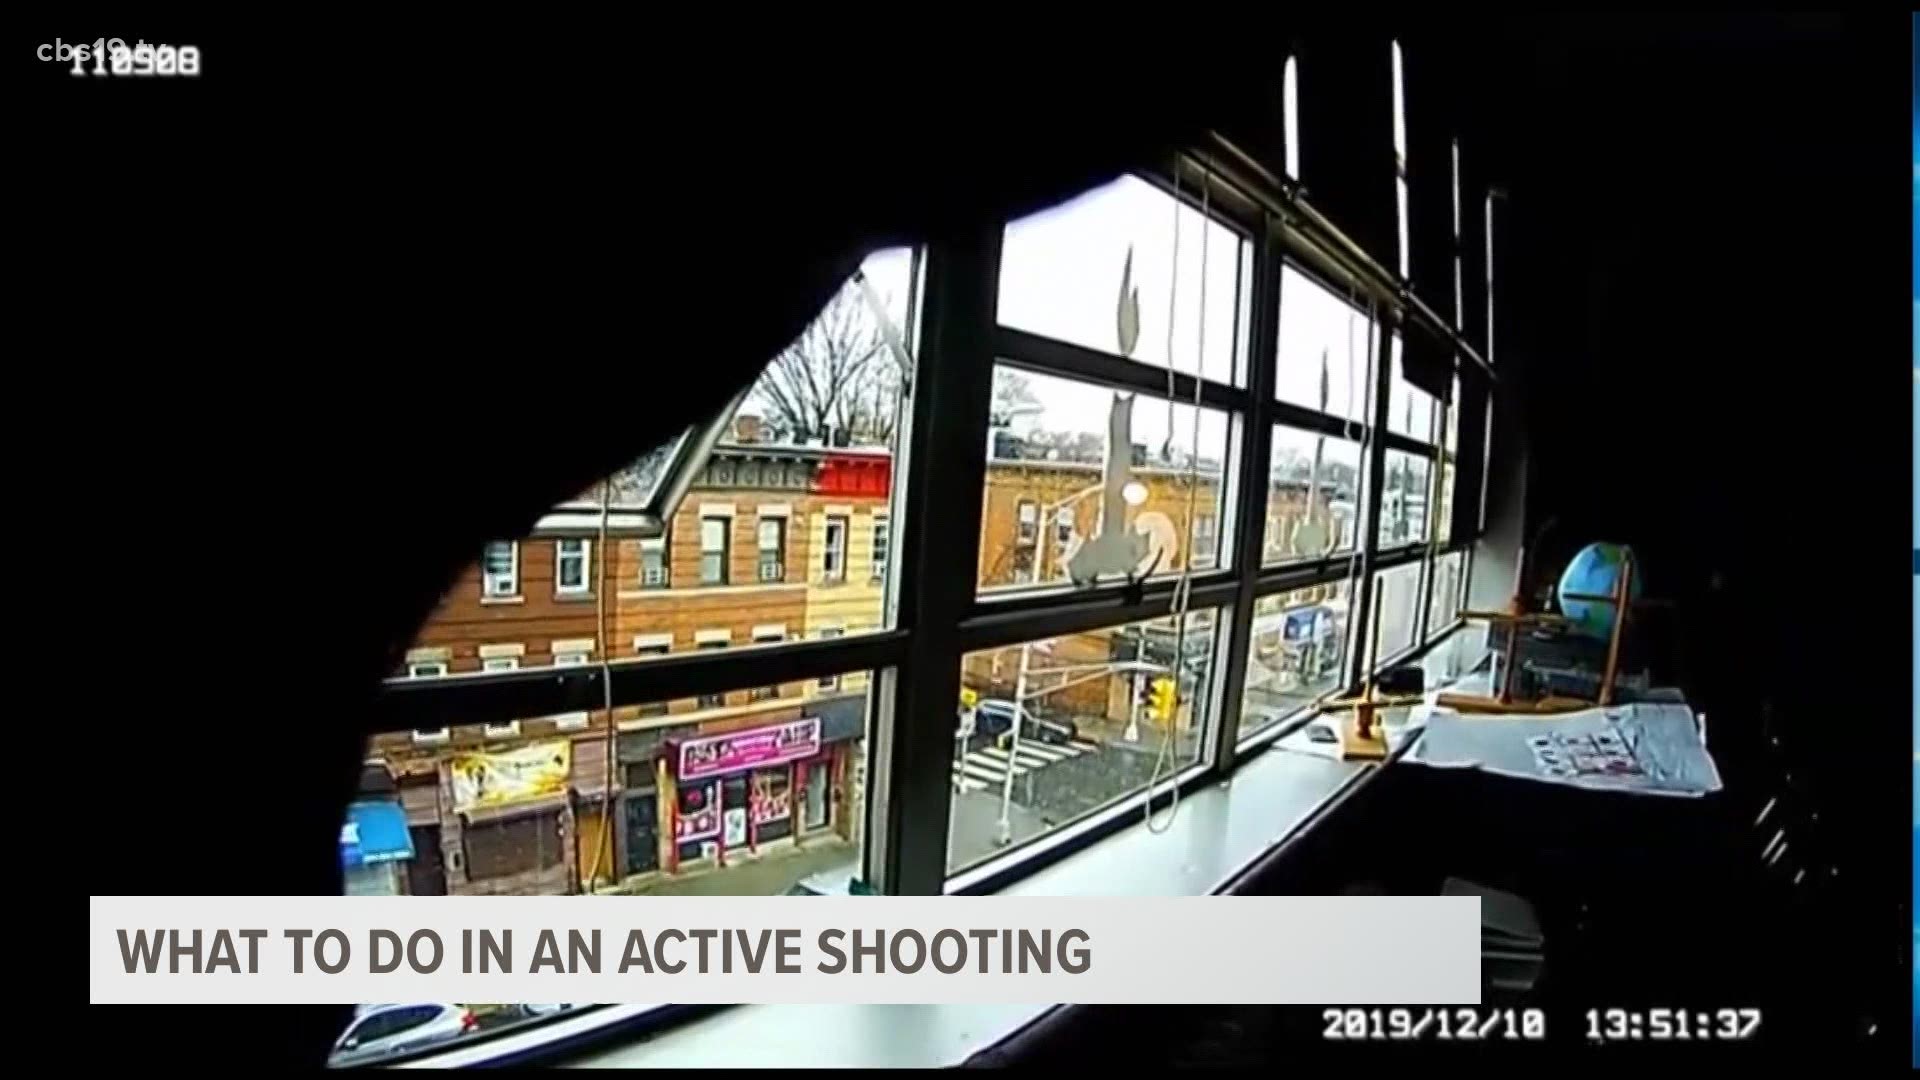 Professionals weigh in on what to do and what NOT to do during an active shooting.